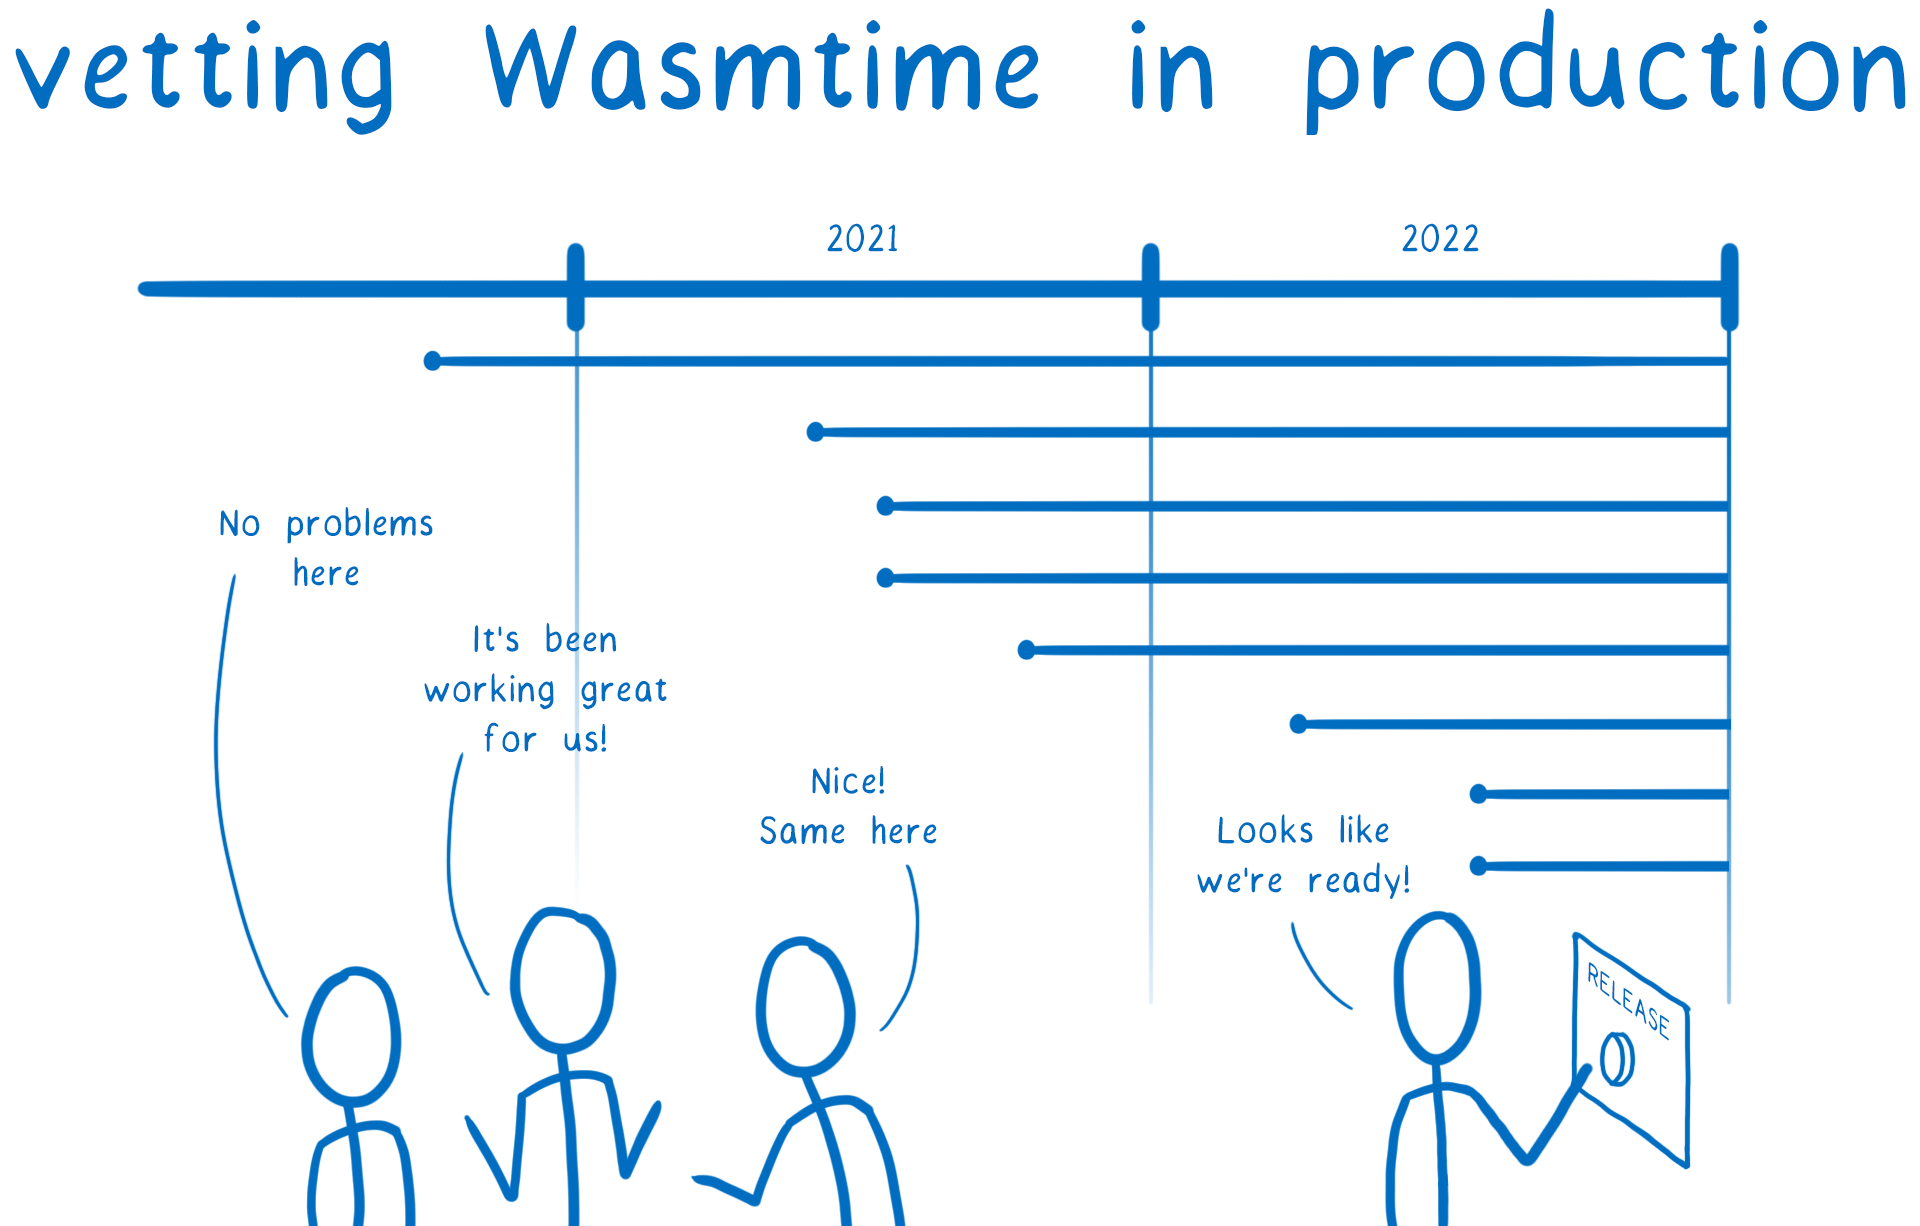 A timeline showing when companies went into production, from 2 years ago to 3 months ago. Maintainers at the bottom talk about how they haven't seen any problems, and one says 'Looks like we're ready' as they press the release button.